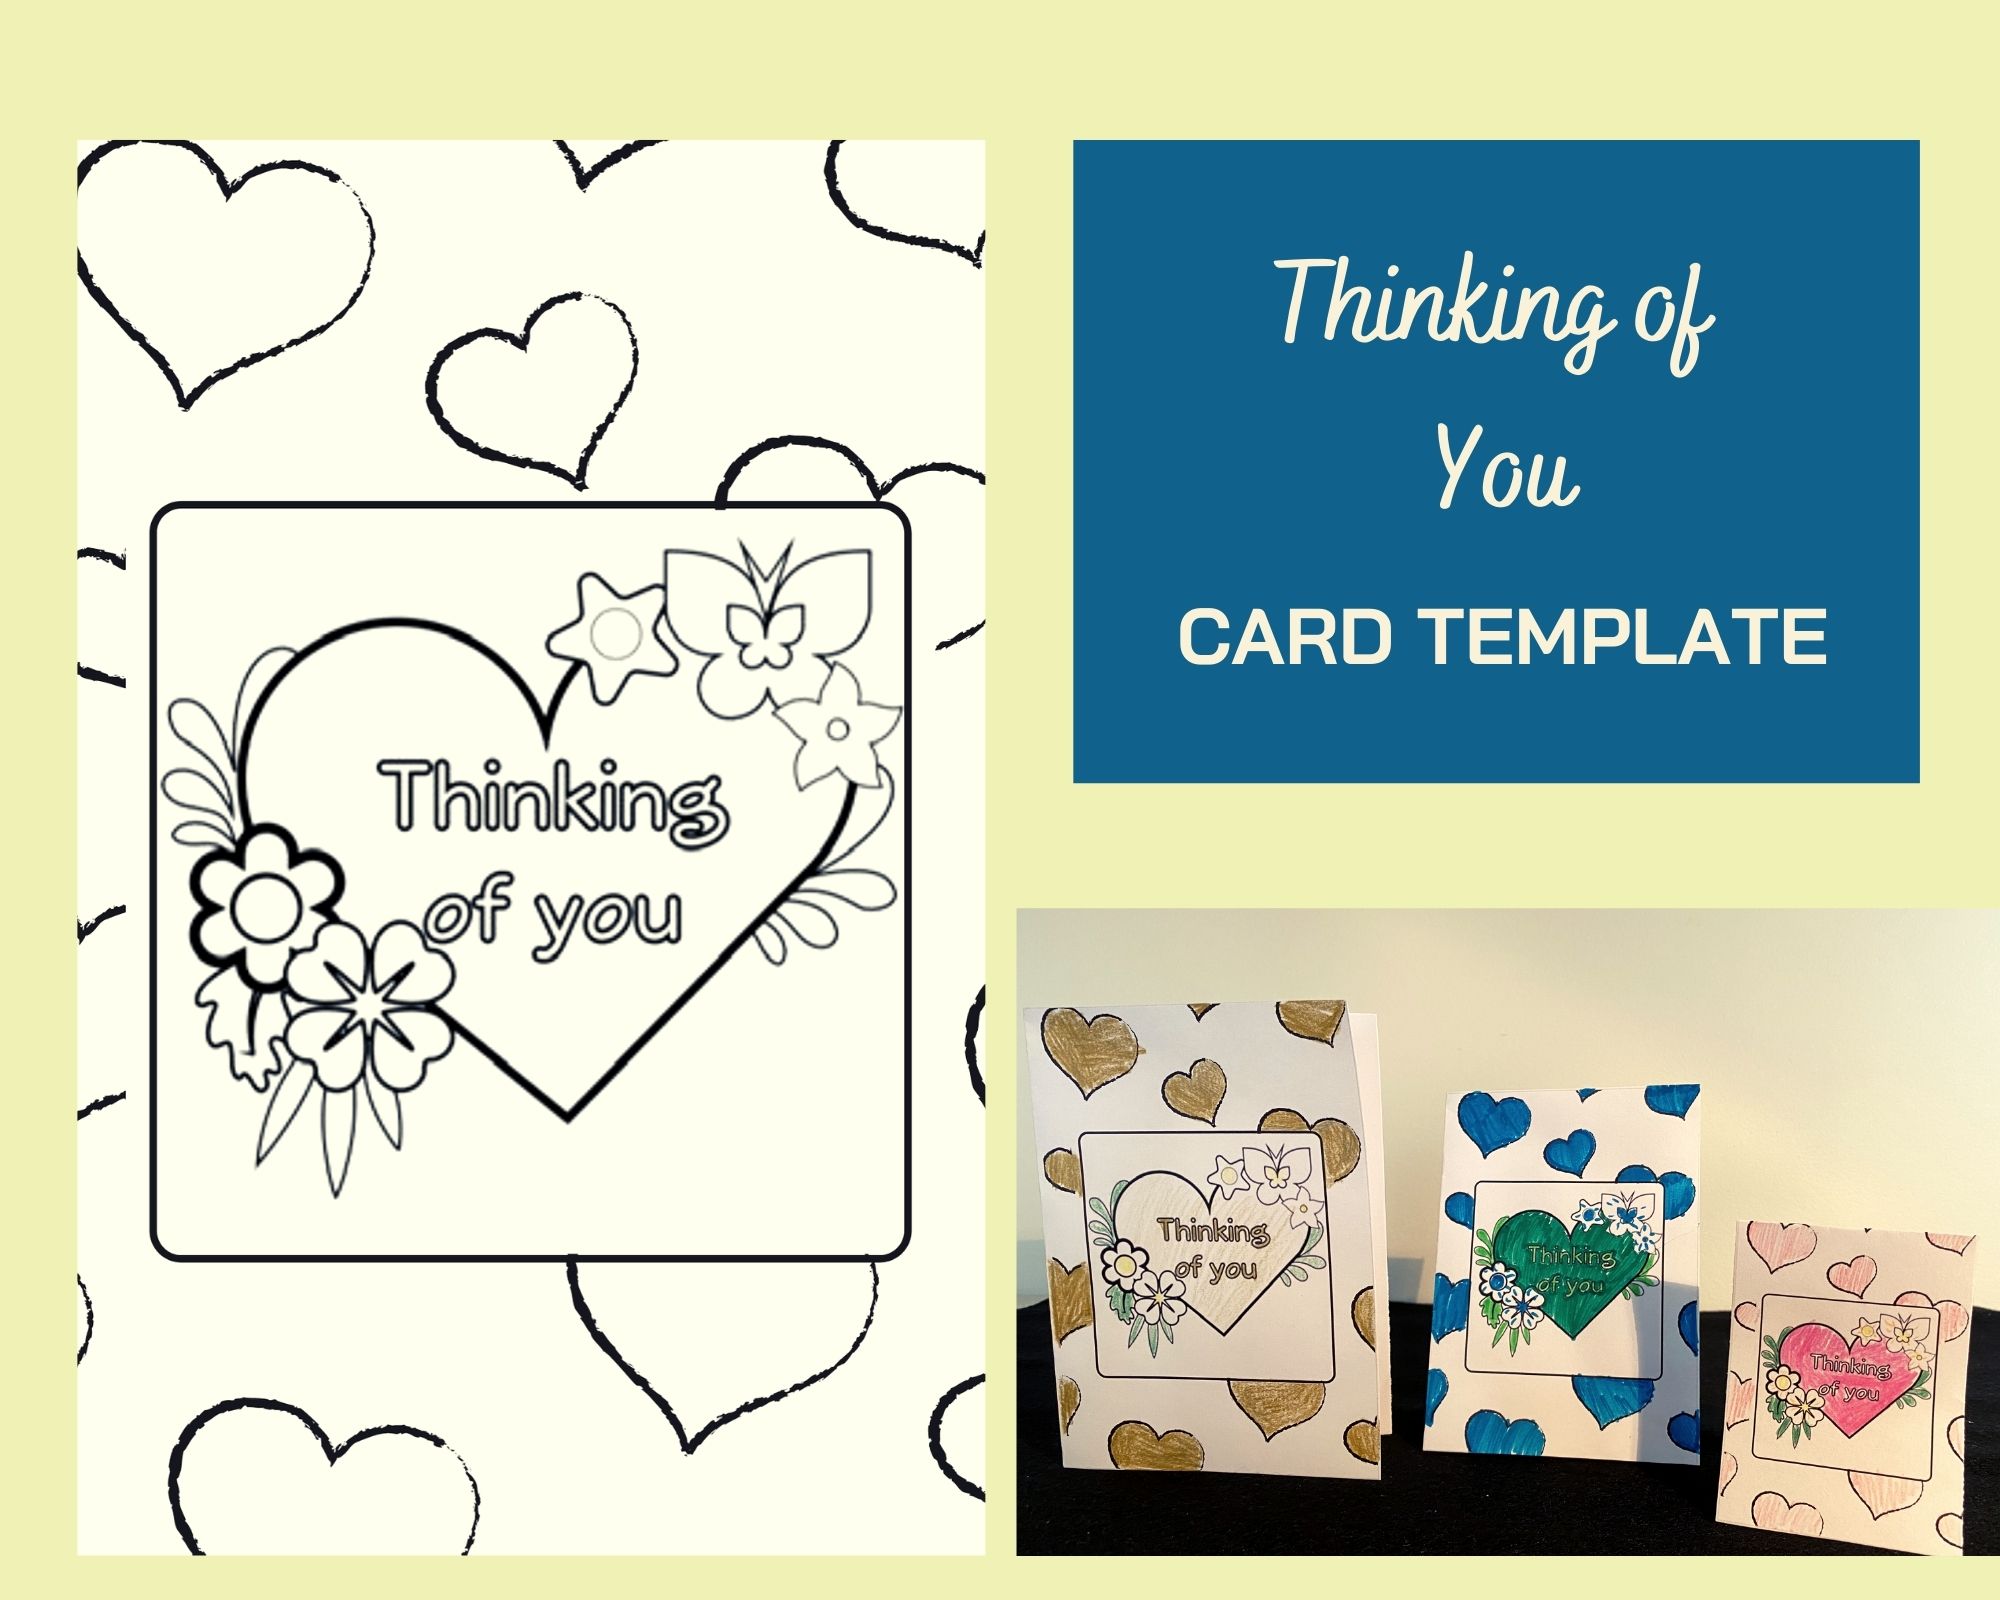 card-template-colouring-in-thinking-of-you-white-bow-gift-registry